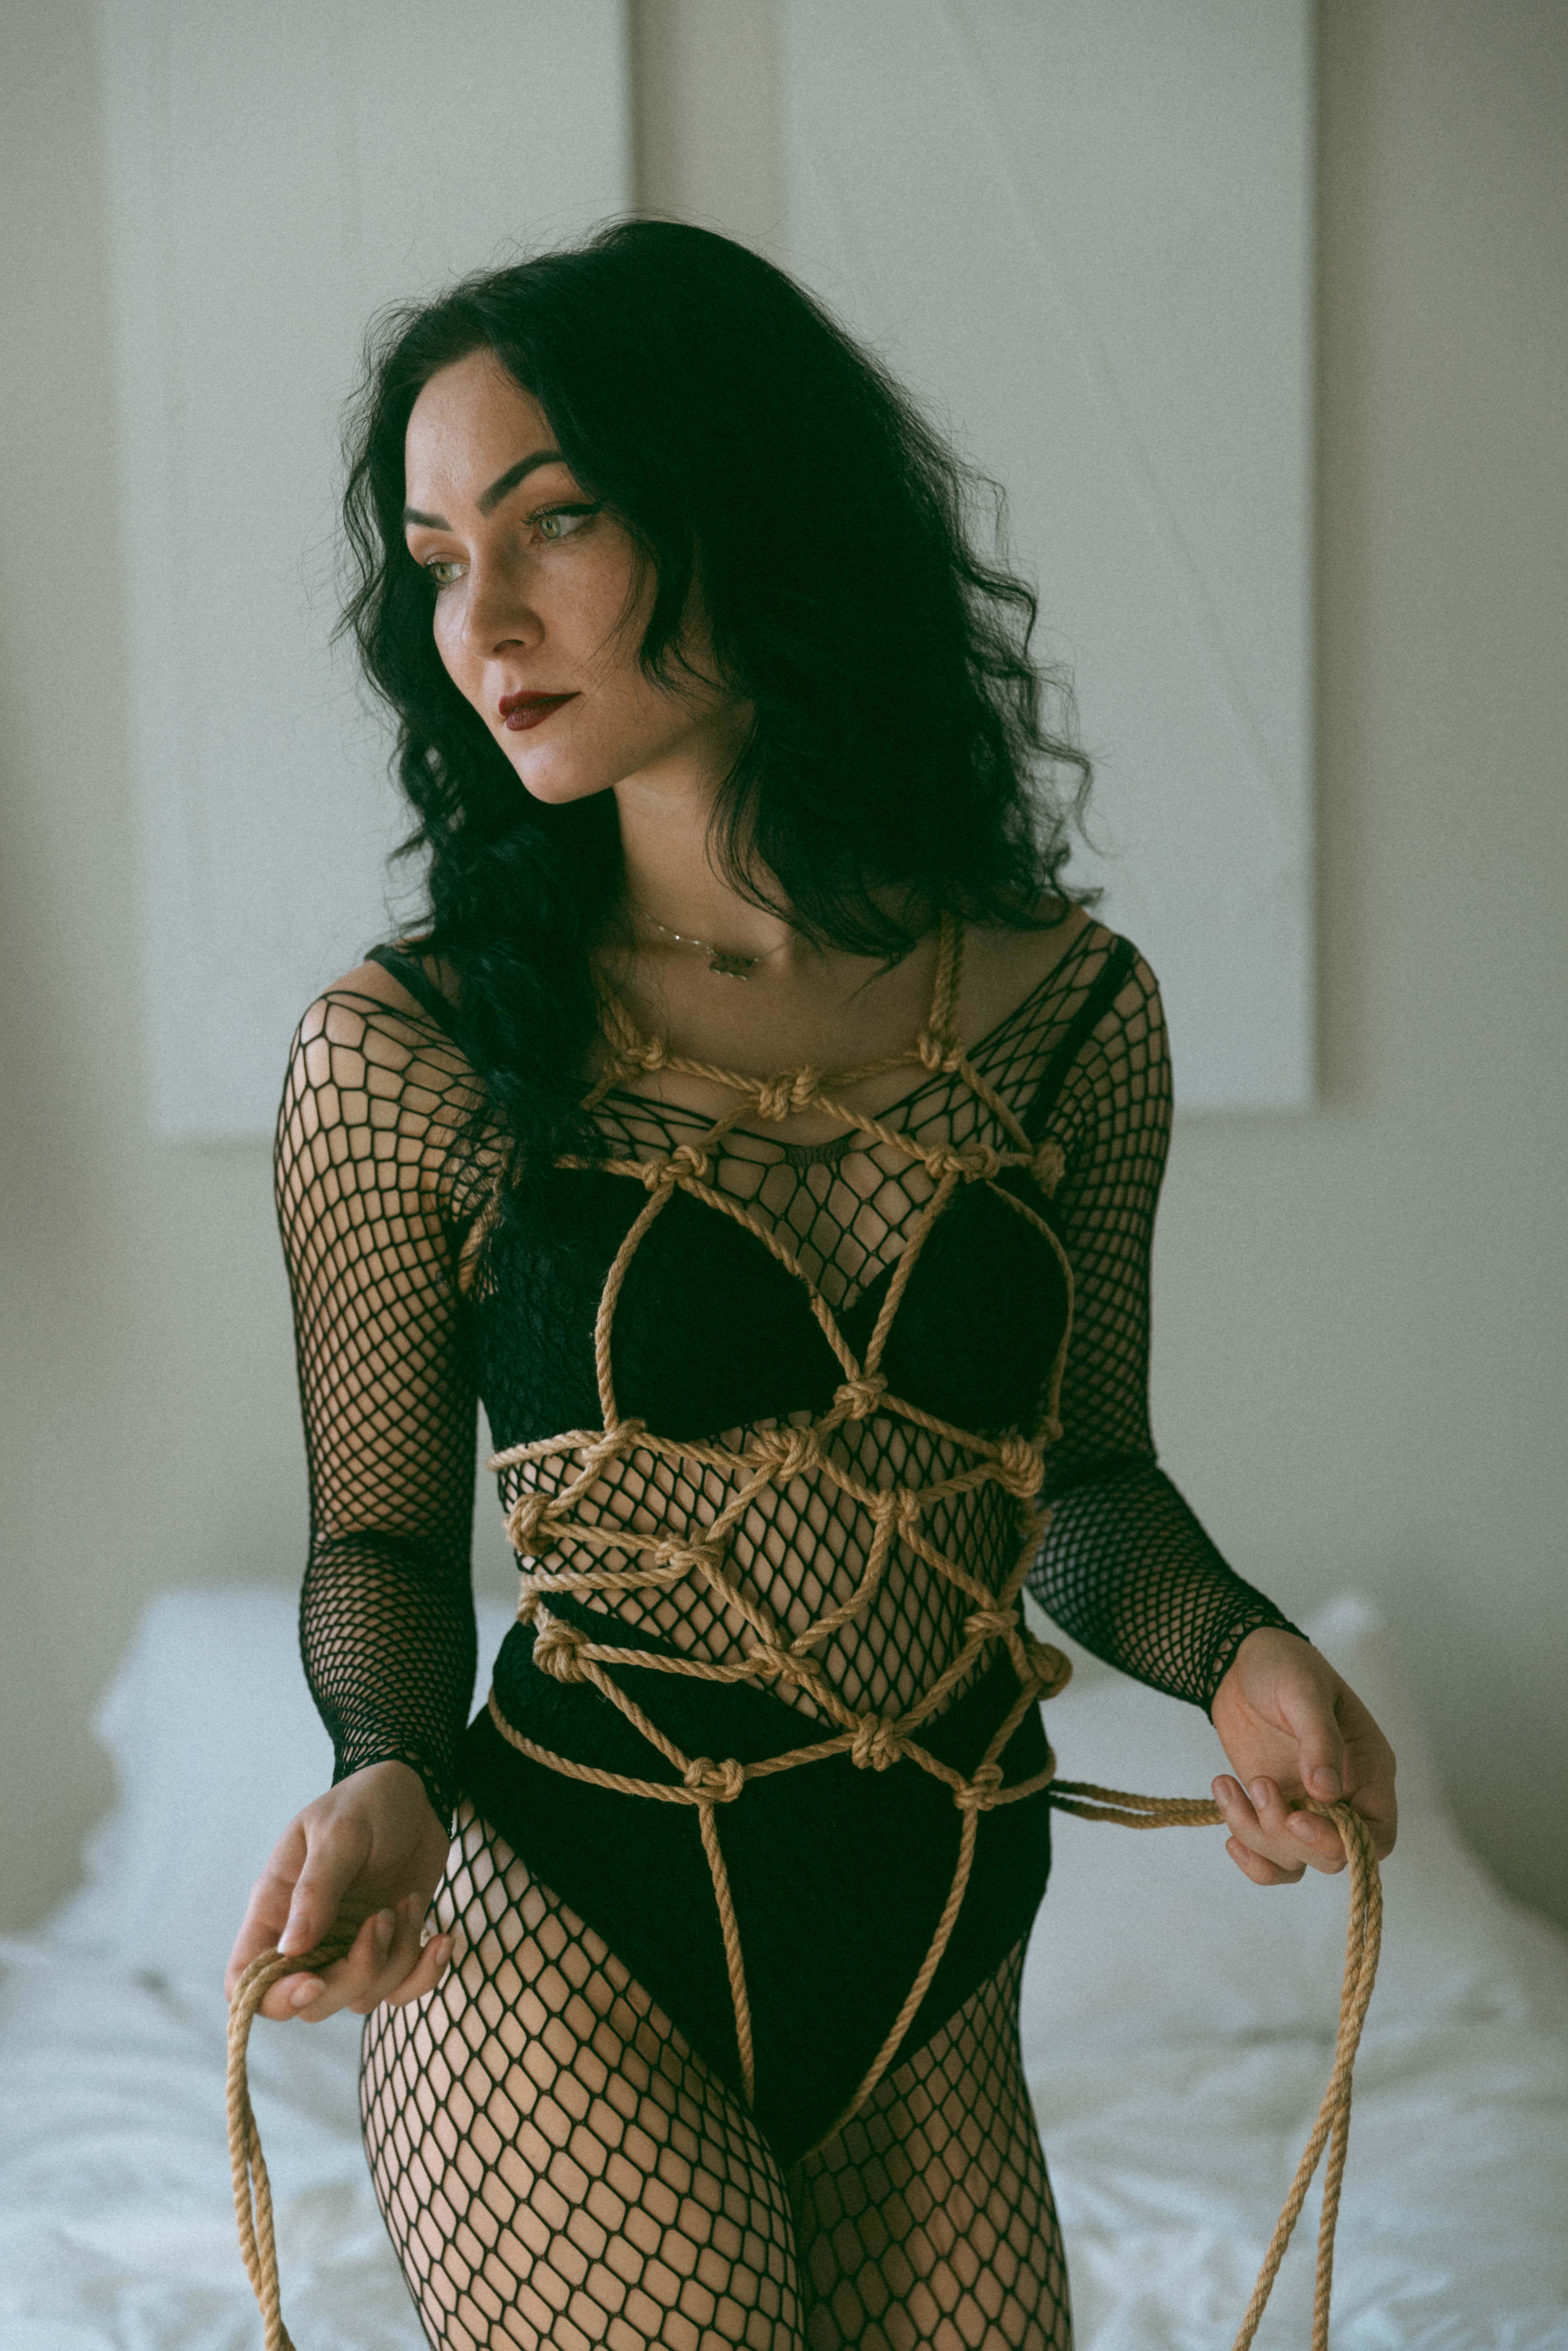 a woman in a fish net body suit with ropes tied around her torso during a sensual shibari session